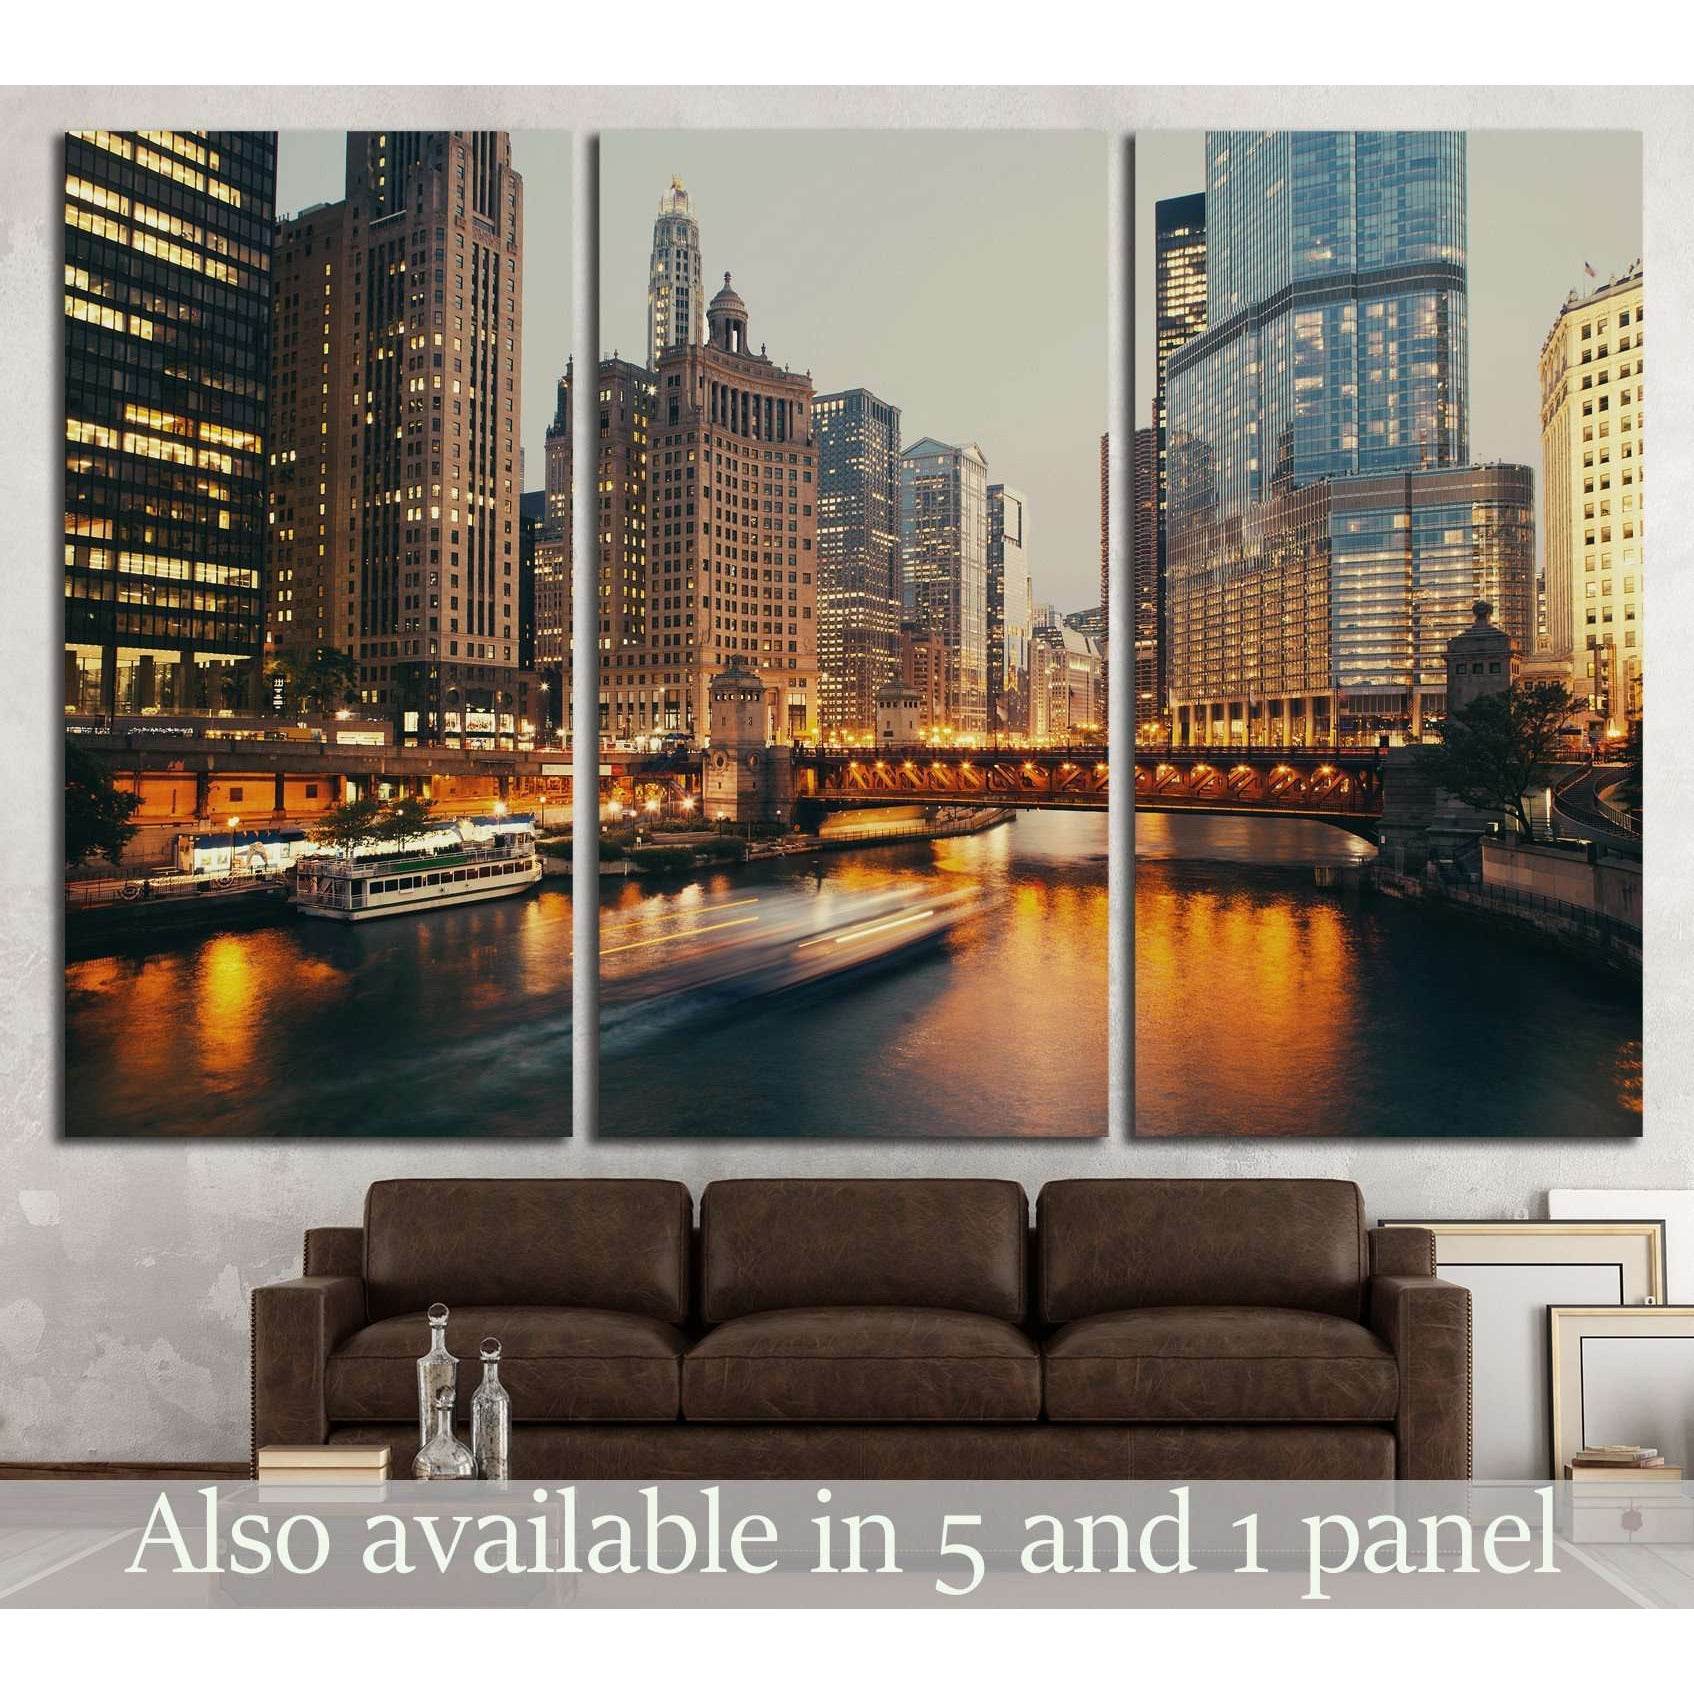 Chicago, Illinois №241 Ready to Hang Canvas Print